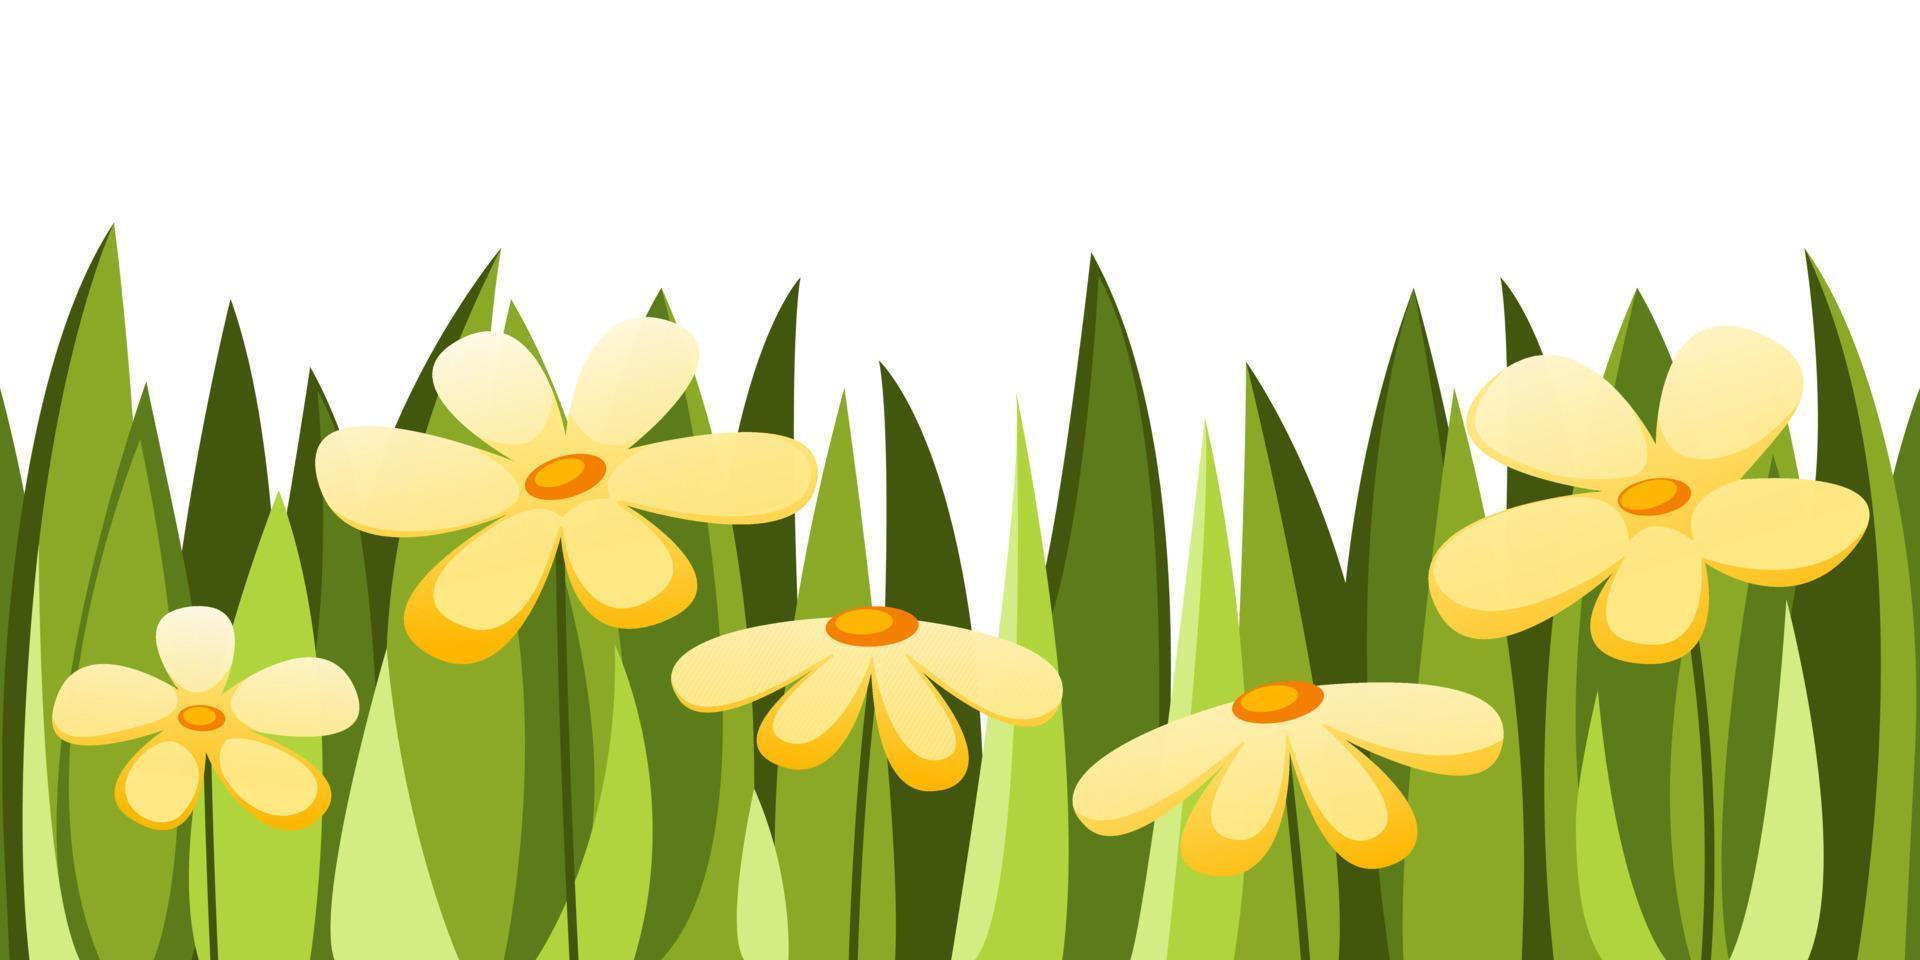 Seamless green grass with yellow wildflowers. Vector horizontal plant pattern.